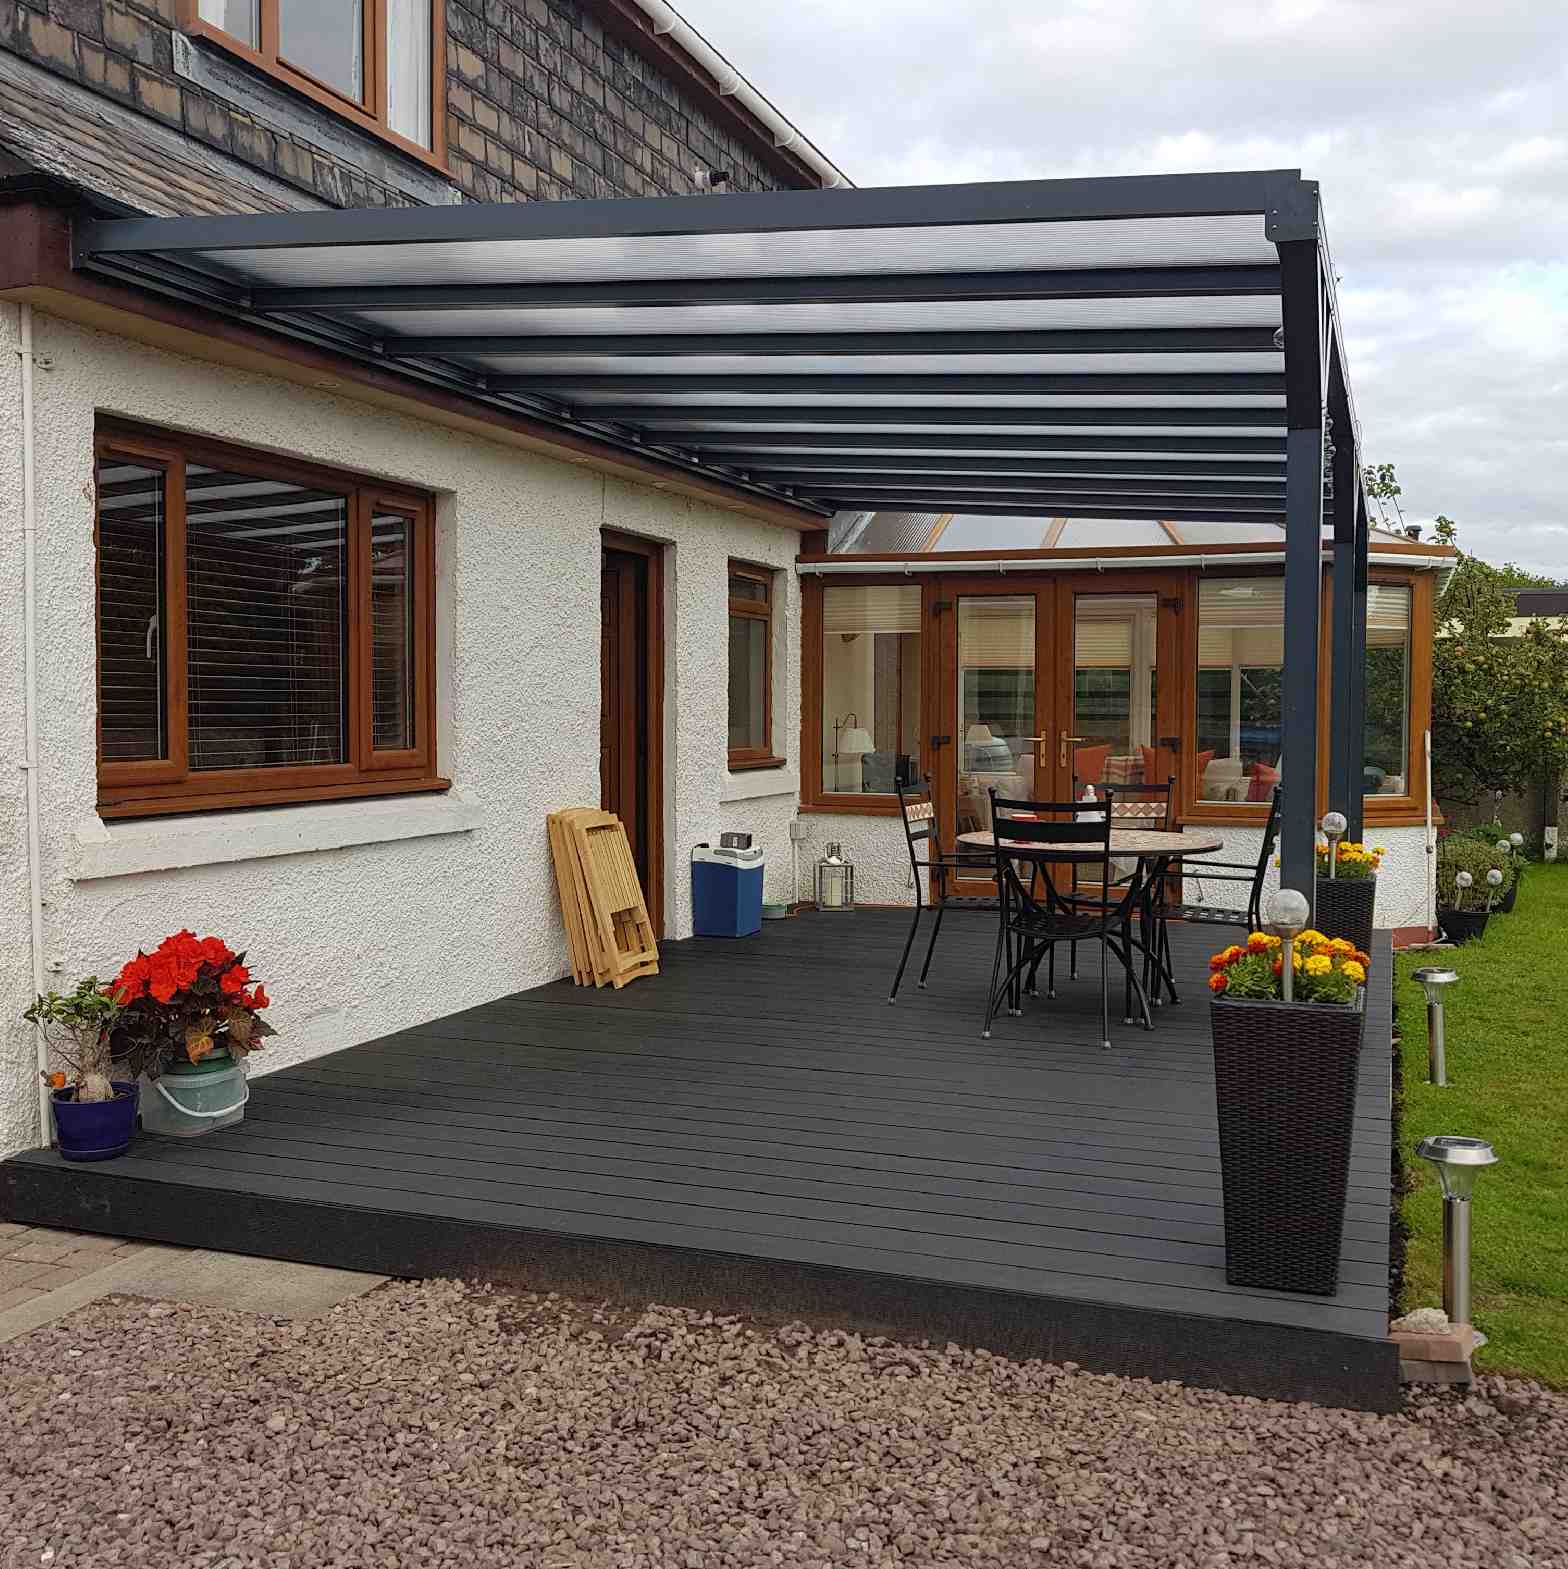 Buy Omega Verandah, Anthracite Grey, 16mm Polycarbonate Glazing - 9.9m (W) x 3.5m (P), (5) Supporting Posts online today